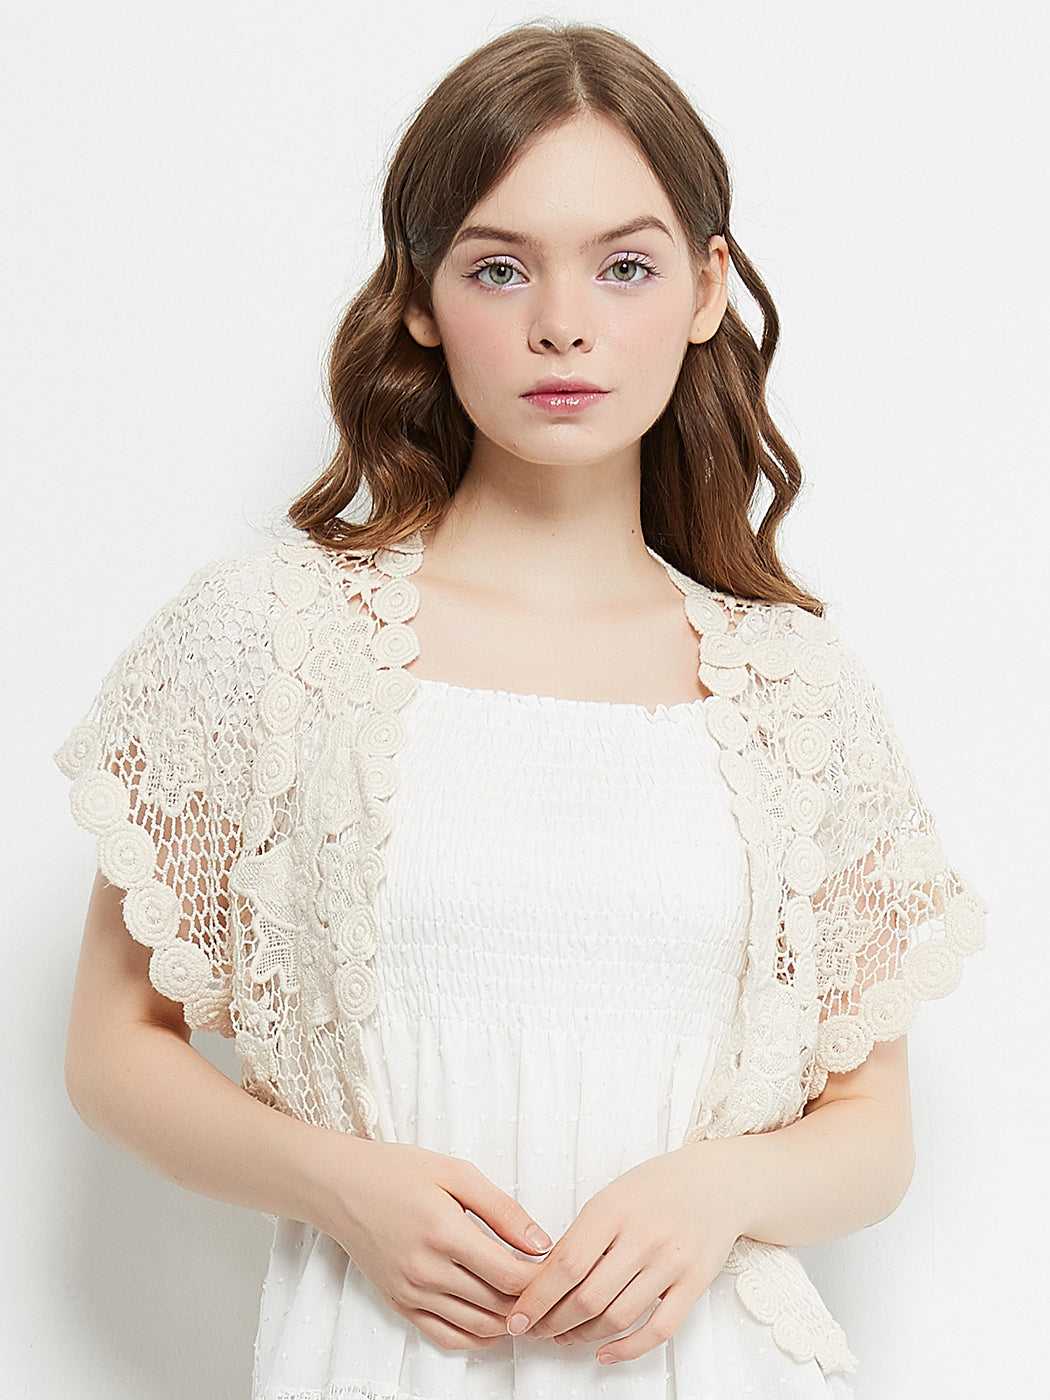 Crochet Floral Lace Short Sleeve Cropped Shrug